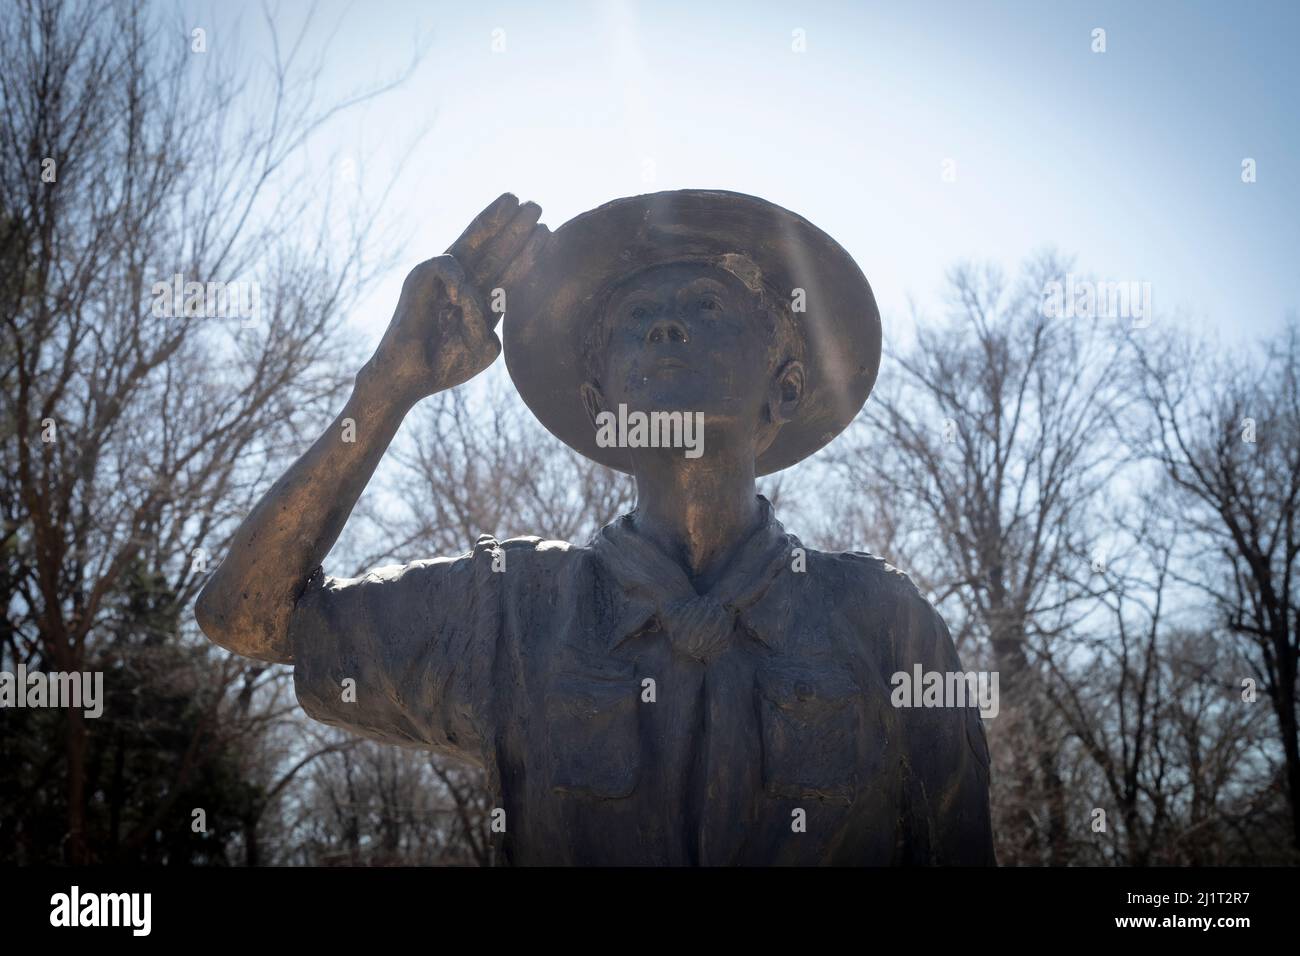 Boyscout statue is located at Ray Harral Nature Center in Broken Arrow, OK. This is a statue to remind young scouts to honor their values. Stock Photo